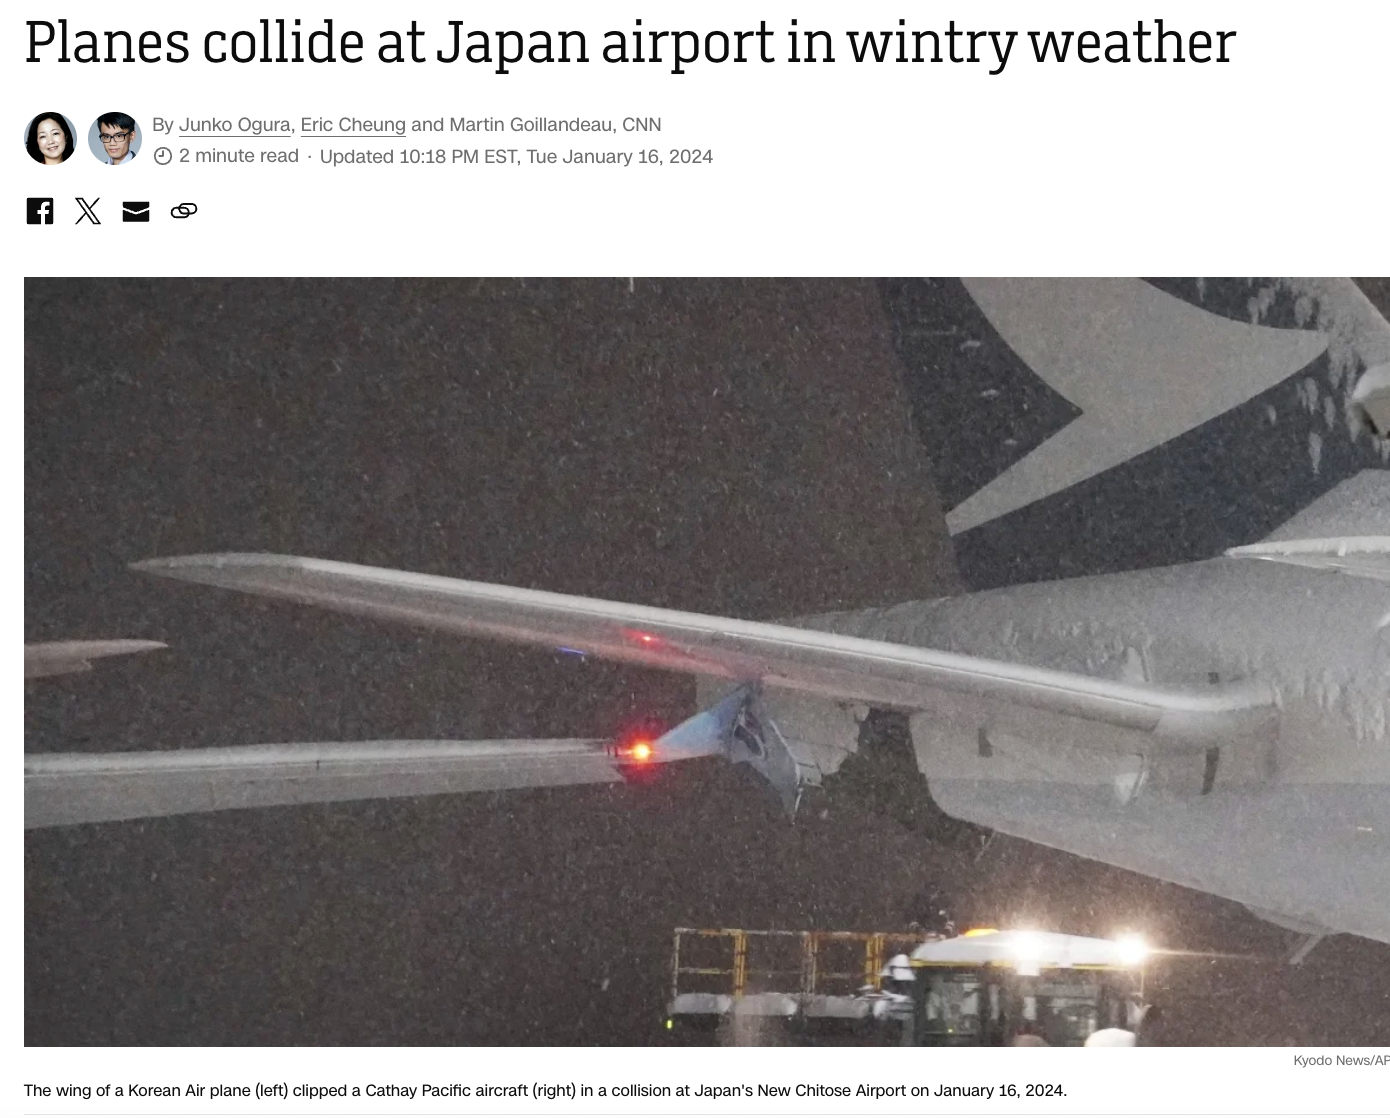 aviation - Planes collide at Japan airport in wintry weather By Junko Ogura, Eric Cheung and Martin Gollandeau, Cnn 2 minute read Updated Est, Tue The wing of a Korean Air plane left clipped a Cathay Pacific aircraft right in a collision at Japan's New Ch